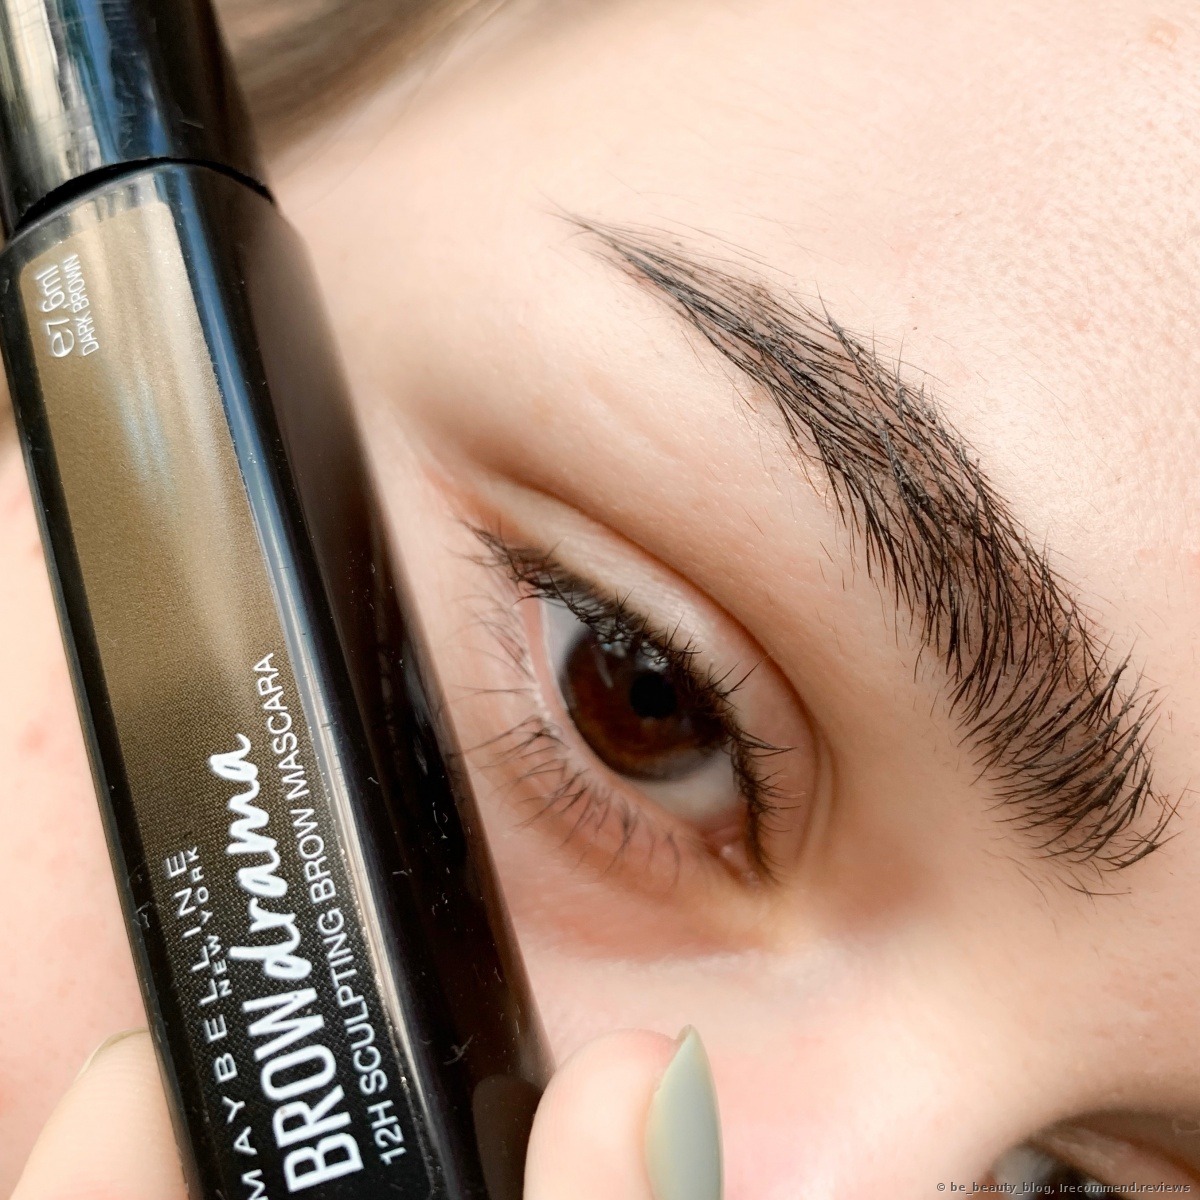 Maybelline Brow Drama Sculpting Eyebrow Mascara - «DARK BROWN is a gray-brown shade. The brow mascara from Maybelline holds my brows in place the day and a handy brush